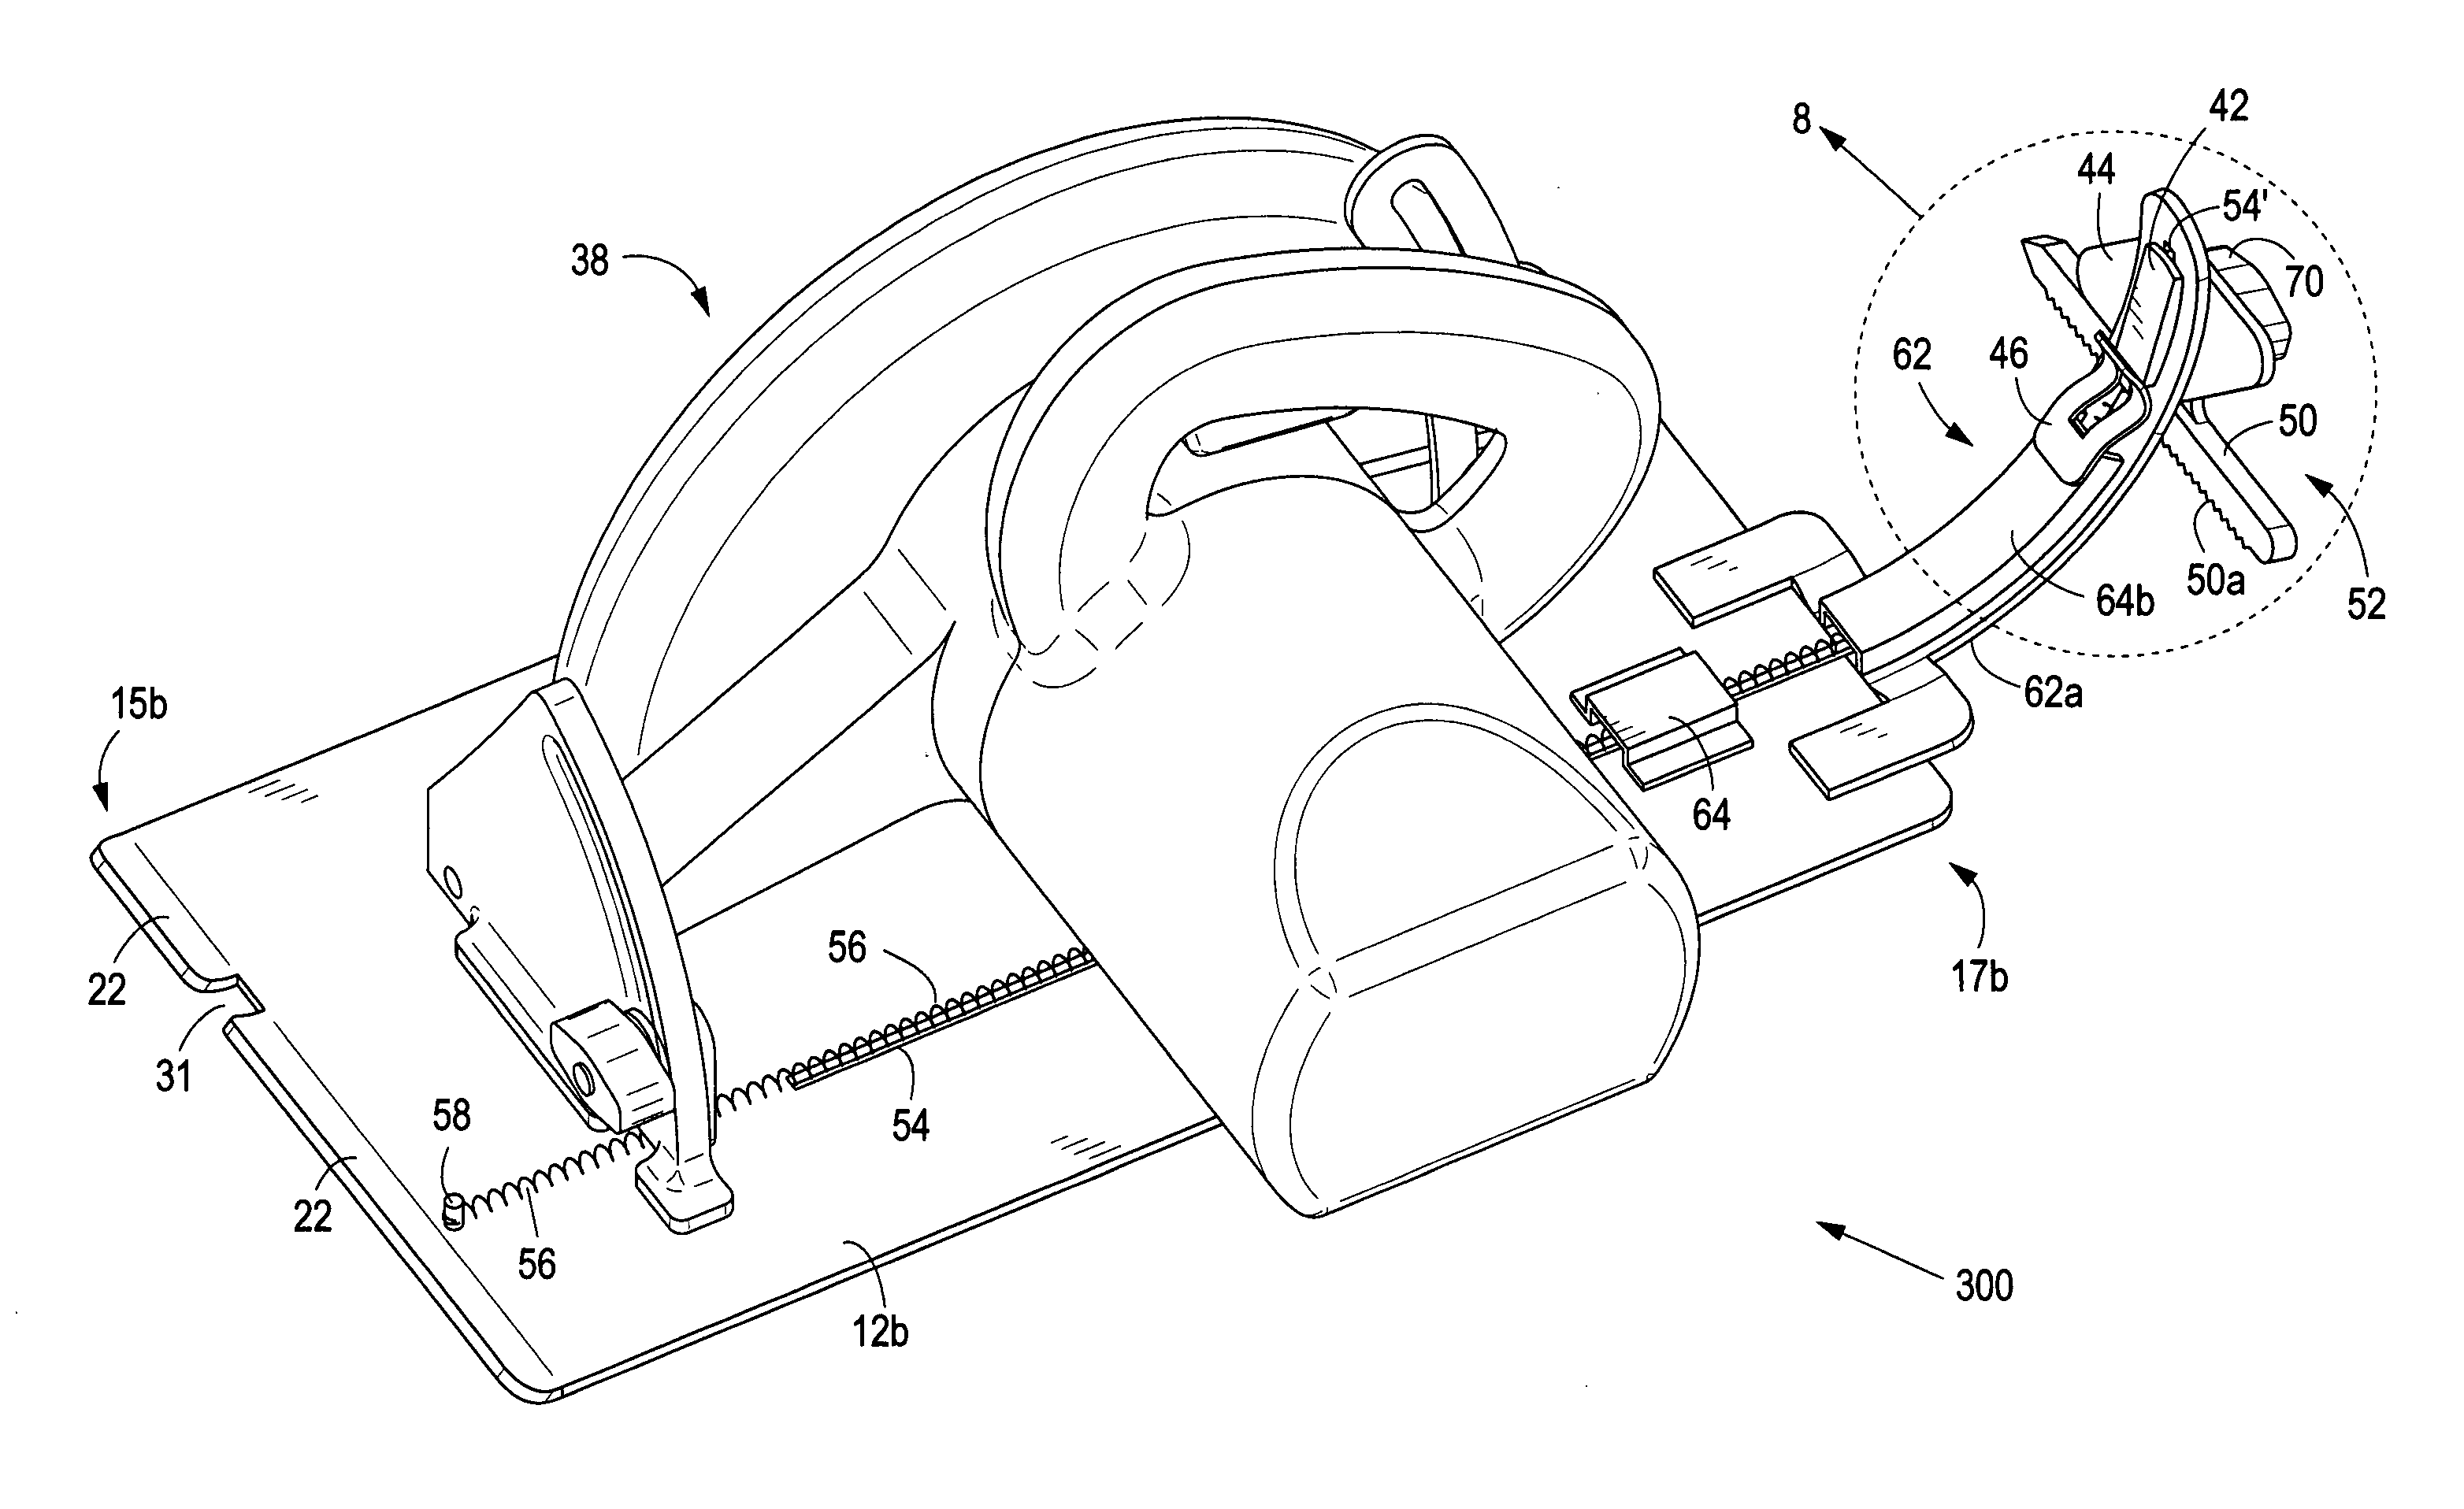 Circular saw for facilitating straight cuts and/or cuts at a desired angle relative to a workpiece edge